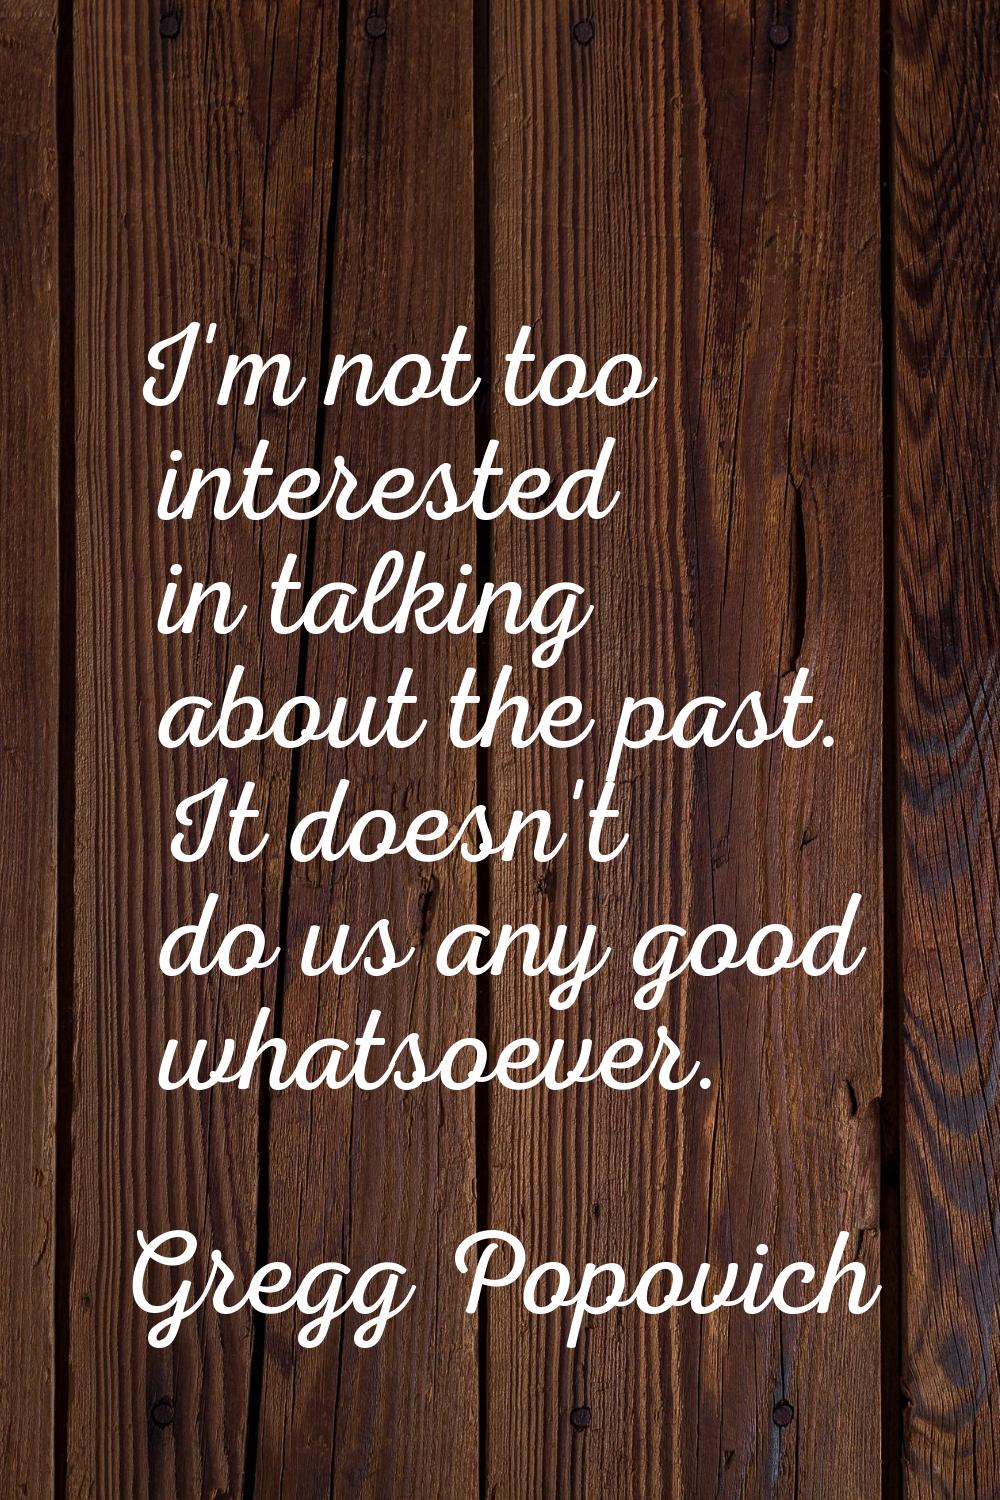 I'm not too interested in talking about the past. It doesn't do us any good whatsoever.